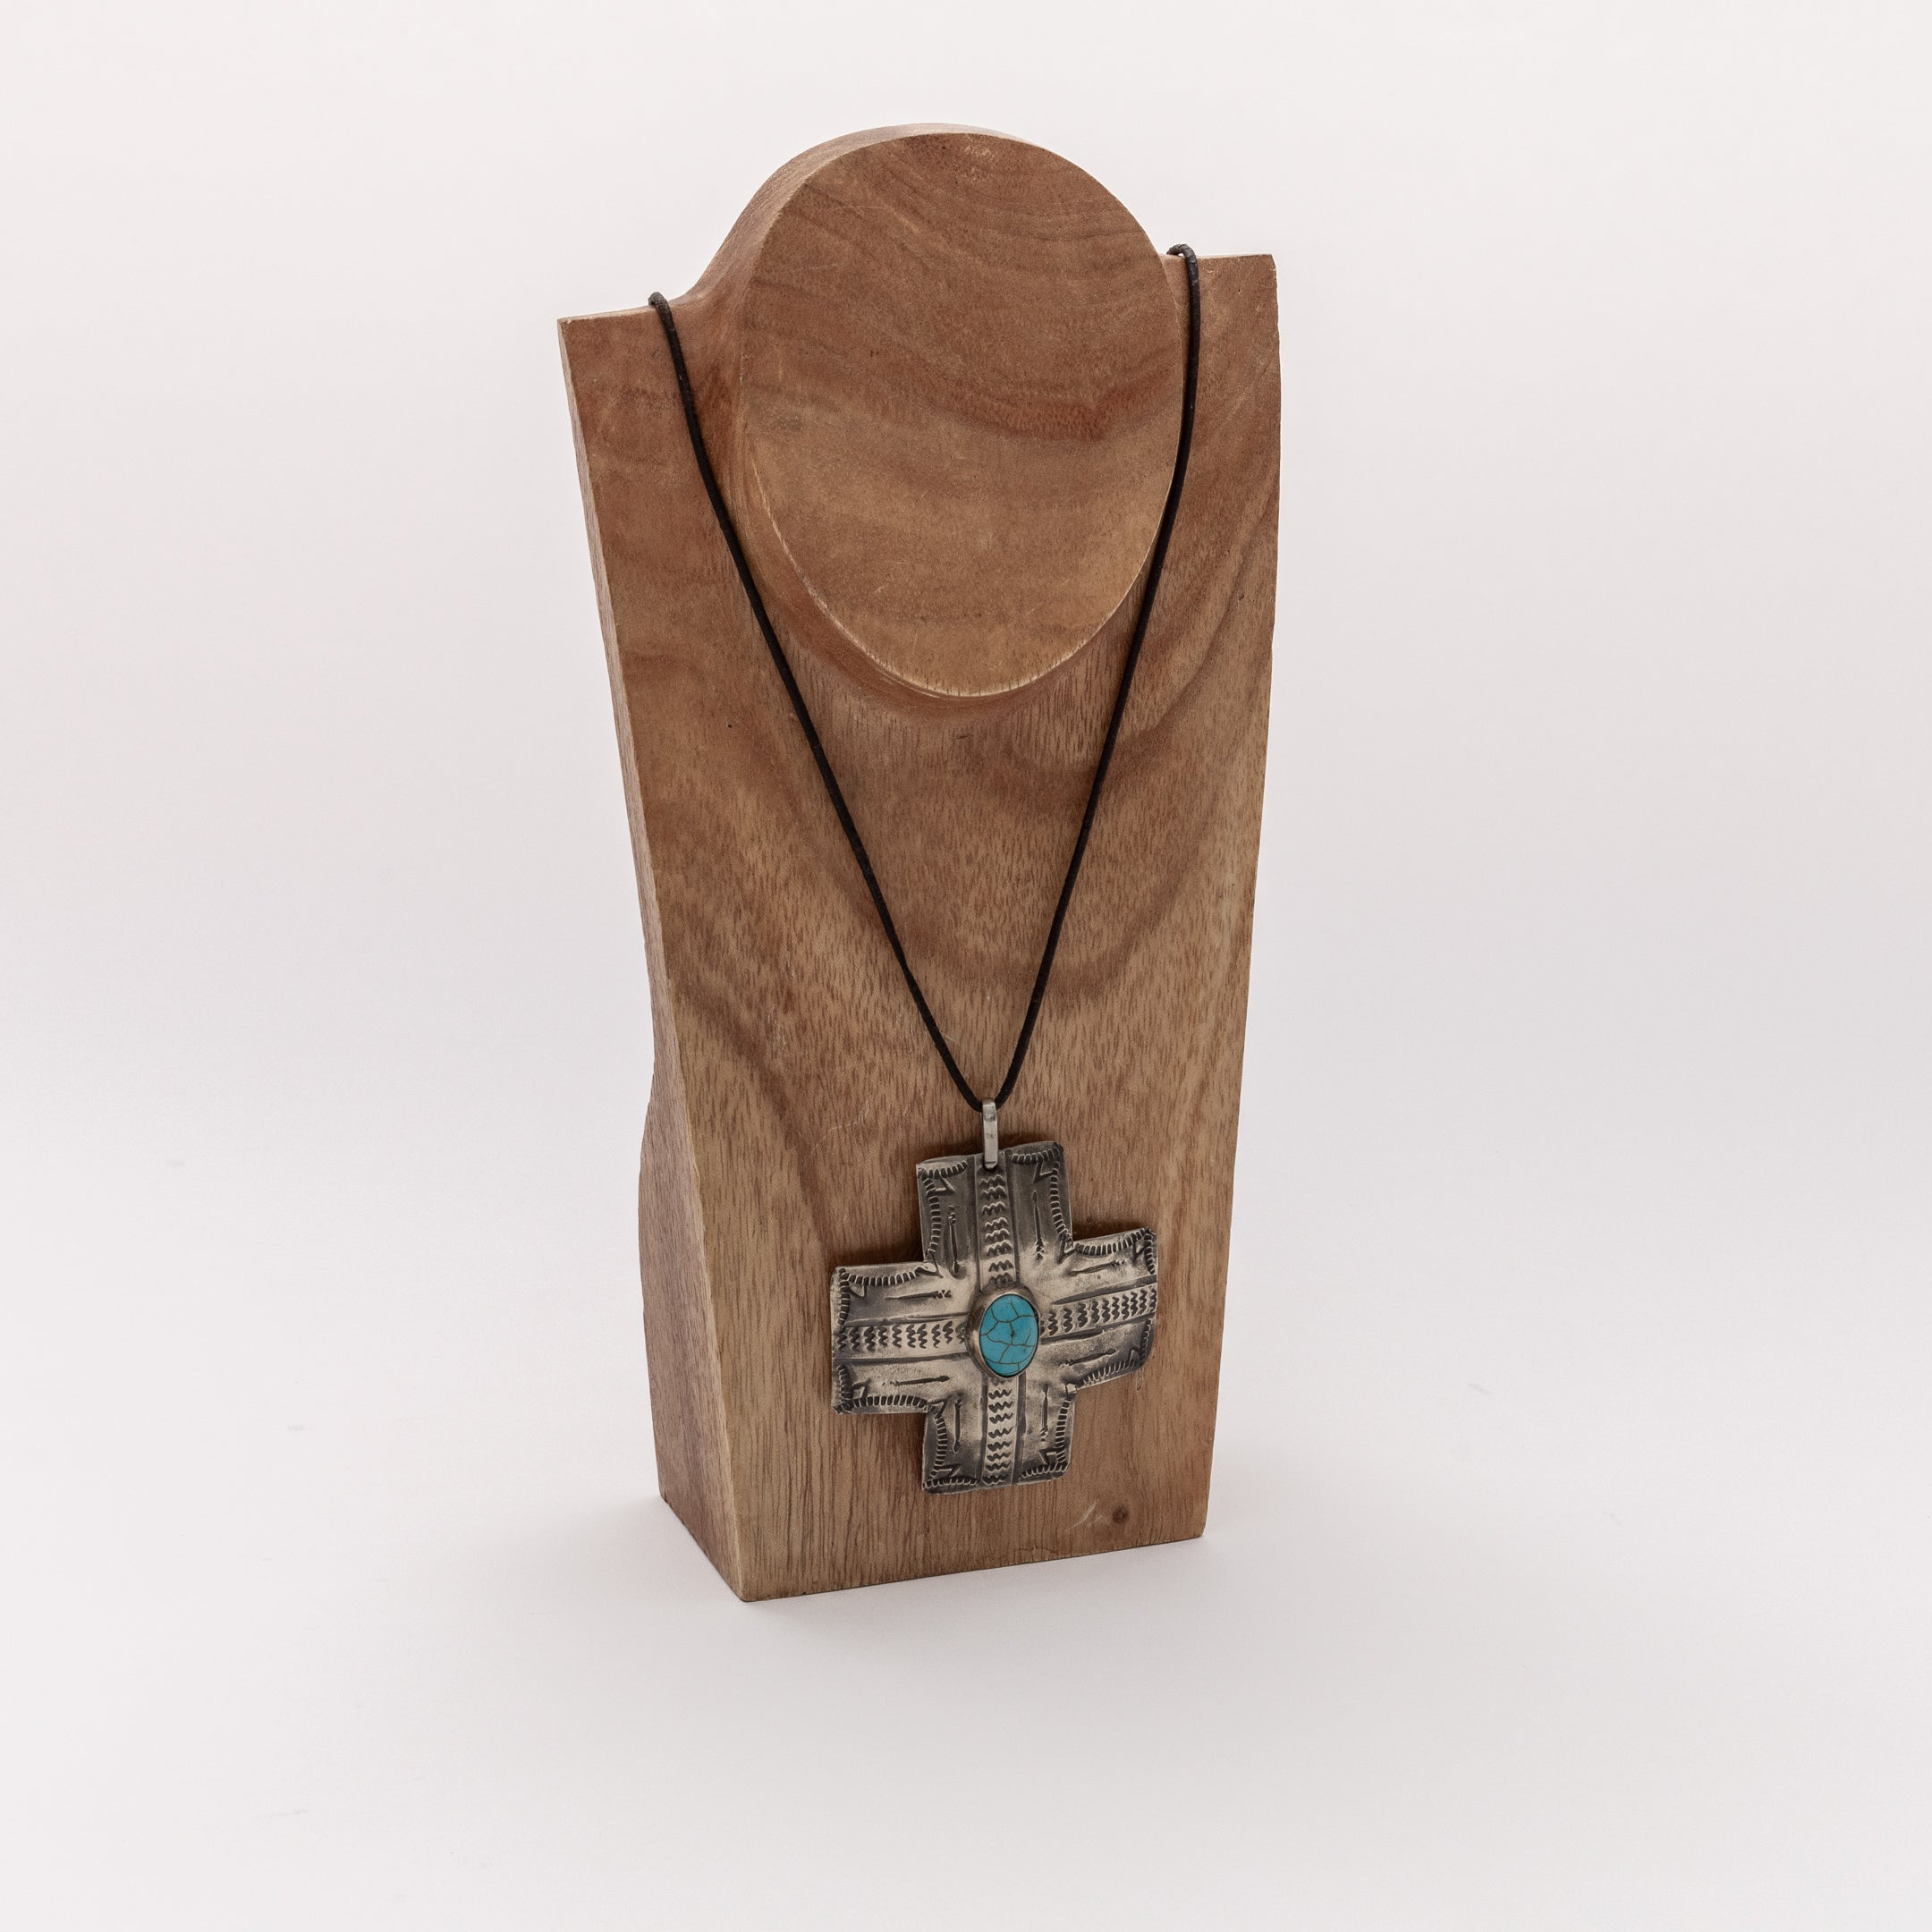 NEW MEXICAN CROSS PENDANT-NECKLACE